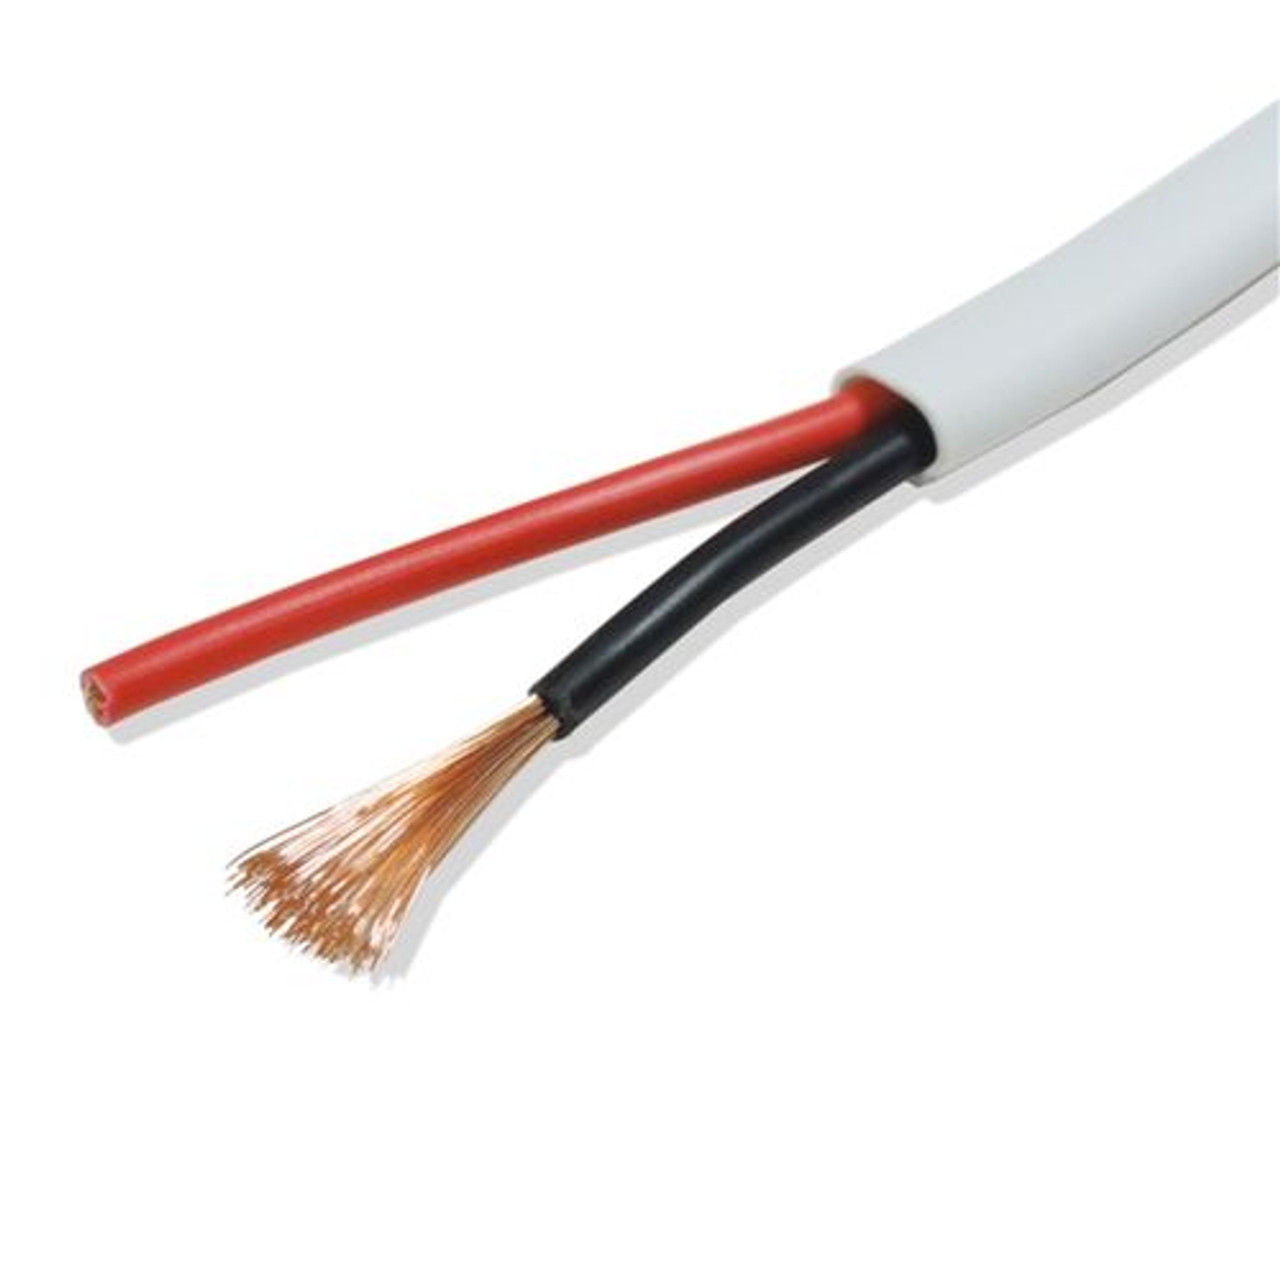 Steren 255-932WH-100 16/2 Speaker Cable 100' FT Bulk Cable Pro Grade Audio 16 AWG White 16 Gauge 2-Wire Digital Stranded Copper Conductor High Strand Count PVC Jacket UL Listed In-Wall Flexible, Bulk Cable Roll